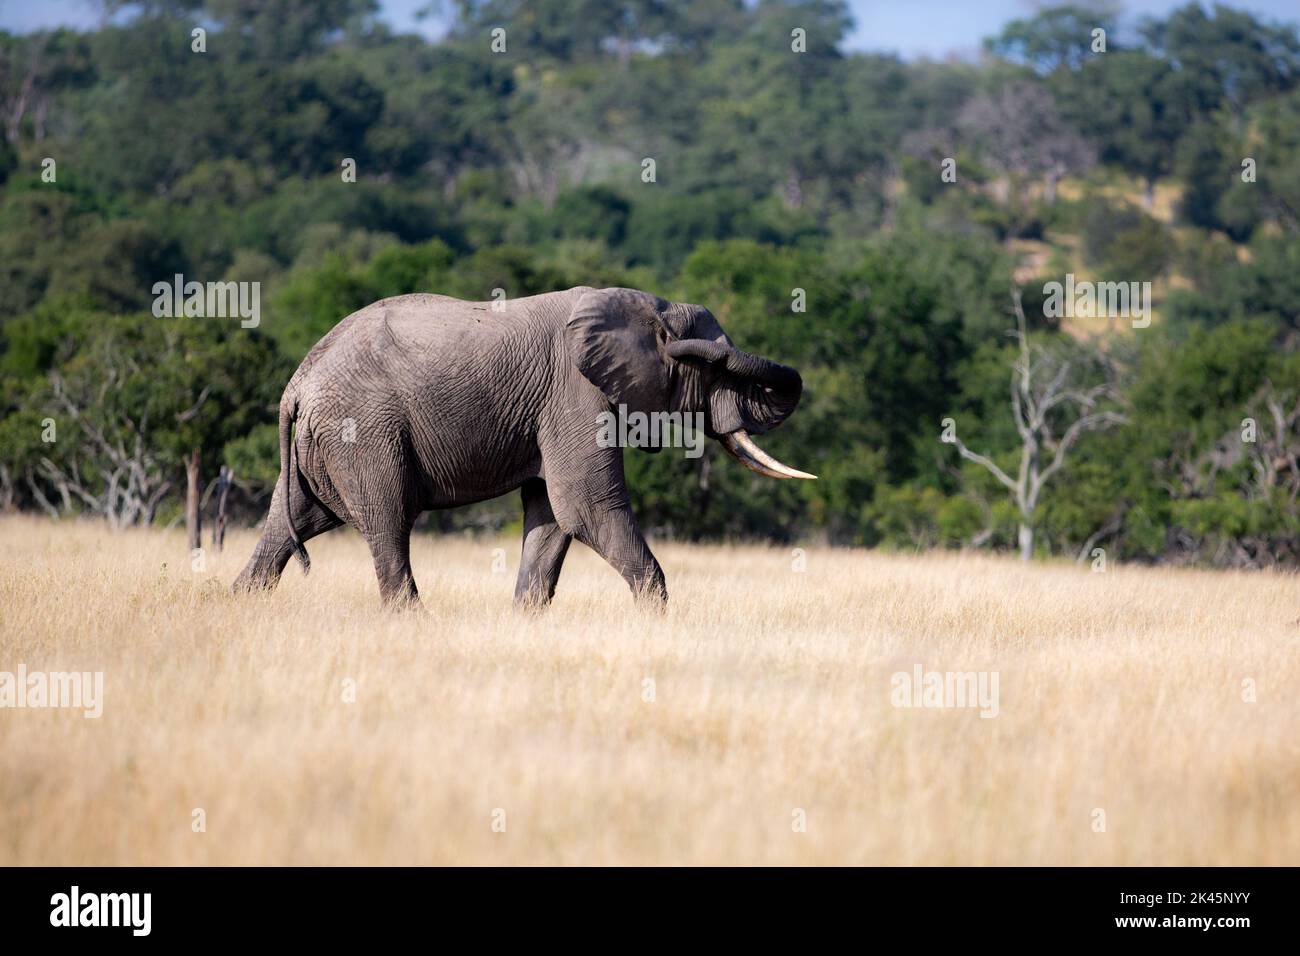 An elephant, Loxodonta africana, walks through long grass while touching its ear with its trunk Stock Photo